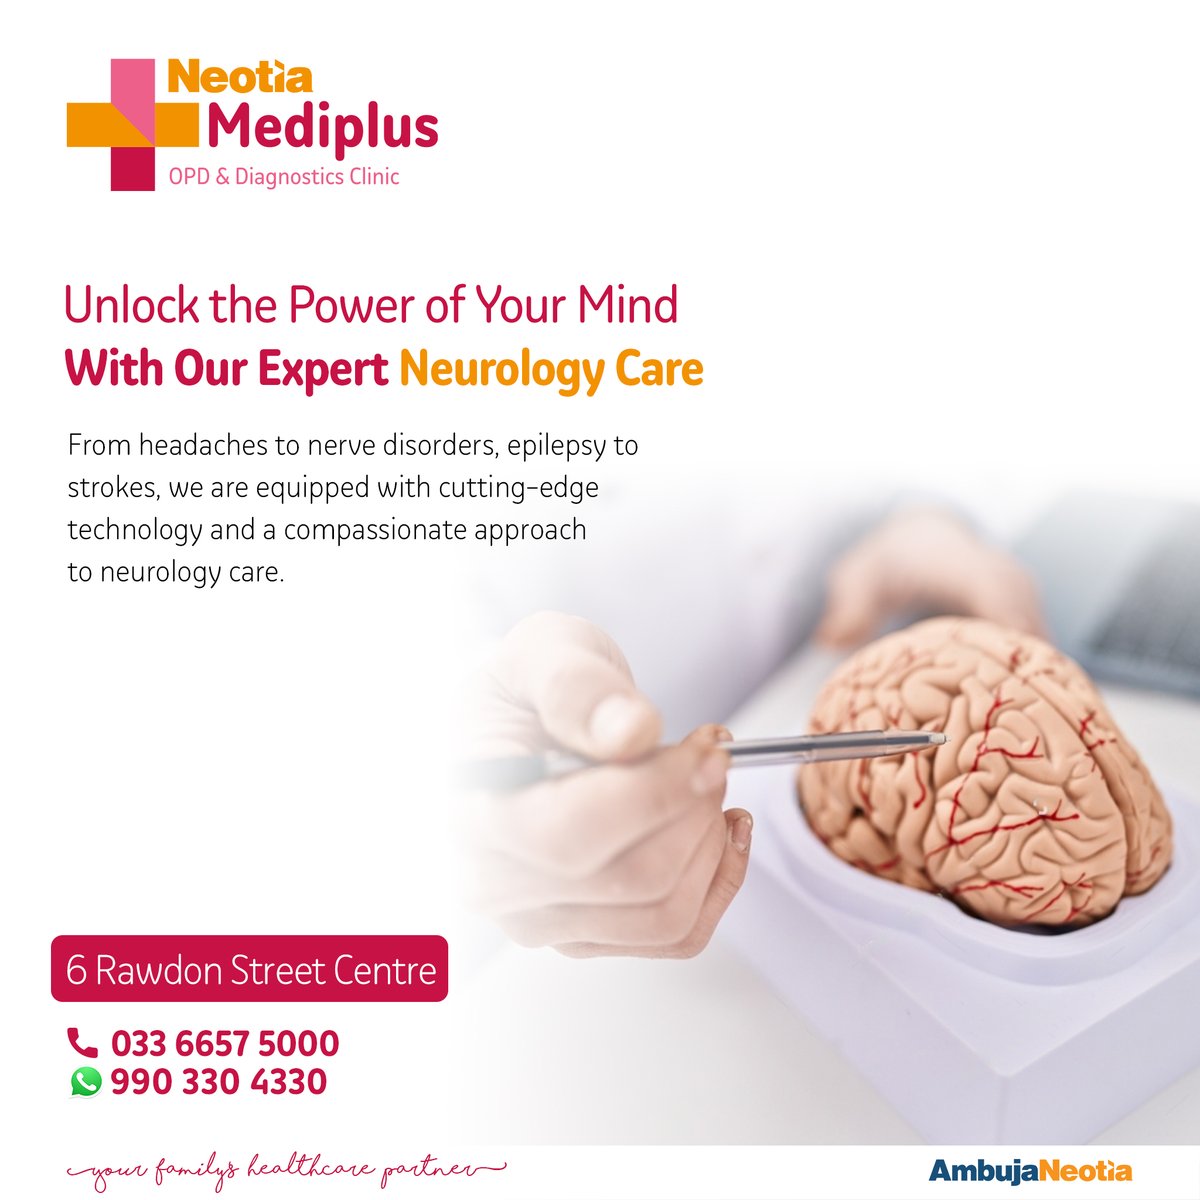 Discover the power of neurology Recognize the signs: headaches, numbness, tingling? Our expert neurologists at Neotia Mediplus offer personalized care. Last year, we helped over 1000 patients! Early detection is key. #Neurology #BrainHealth #ExpertCare #AmbujaNeotia